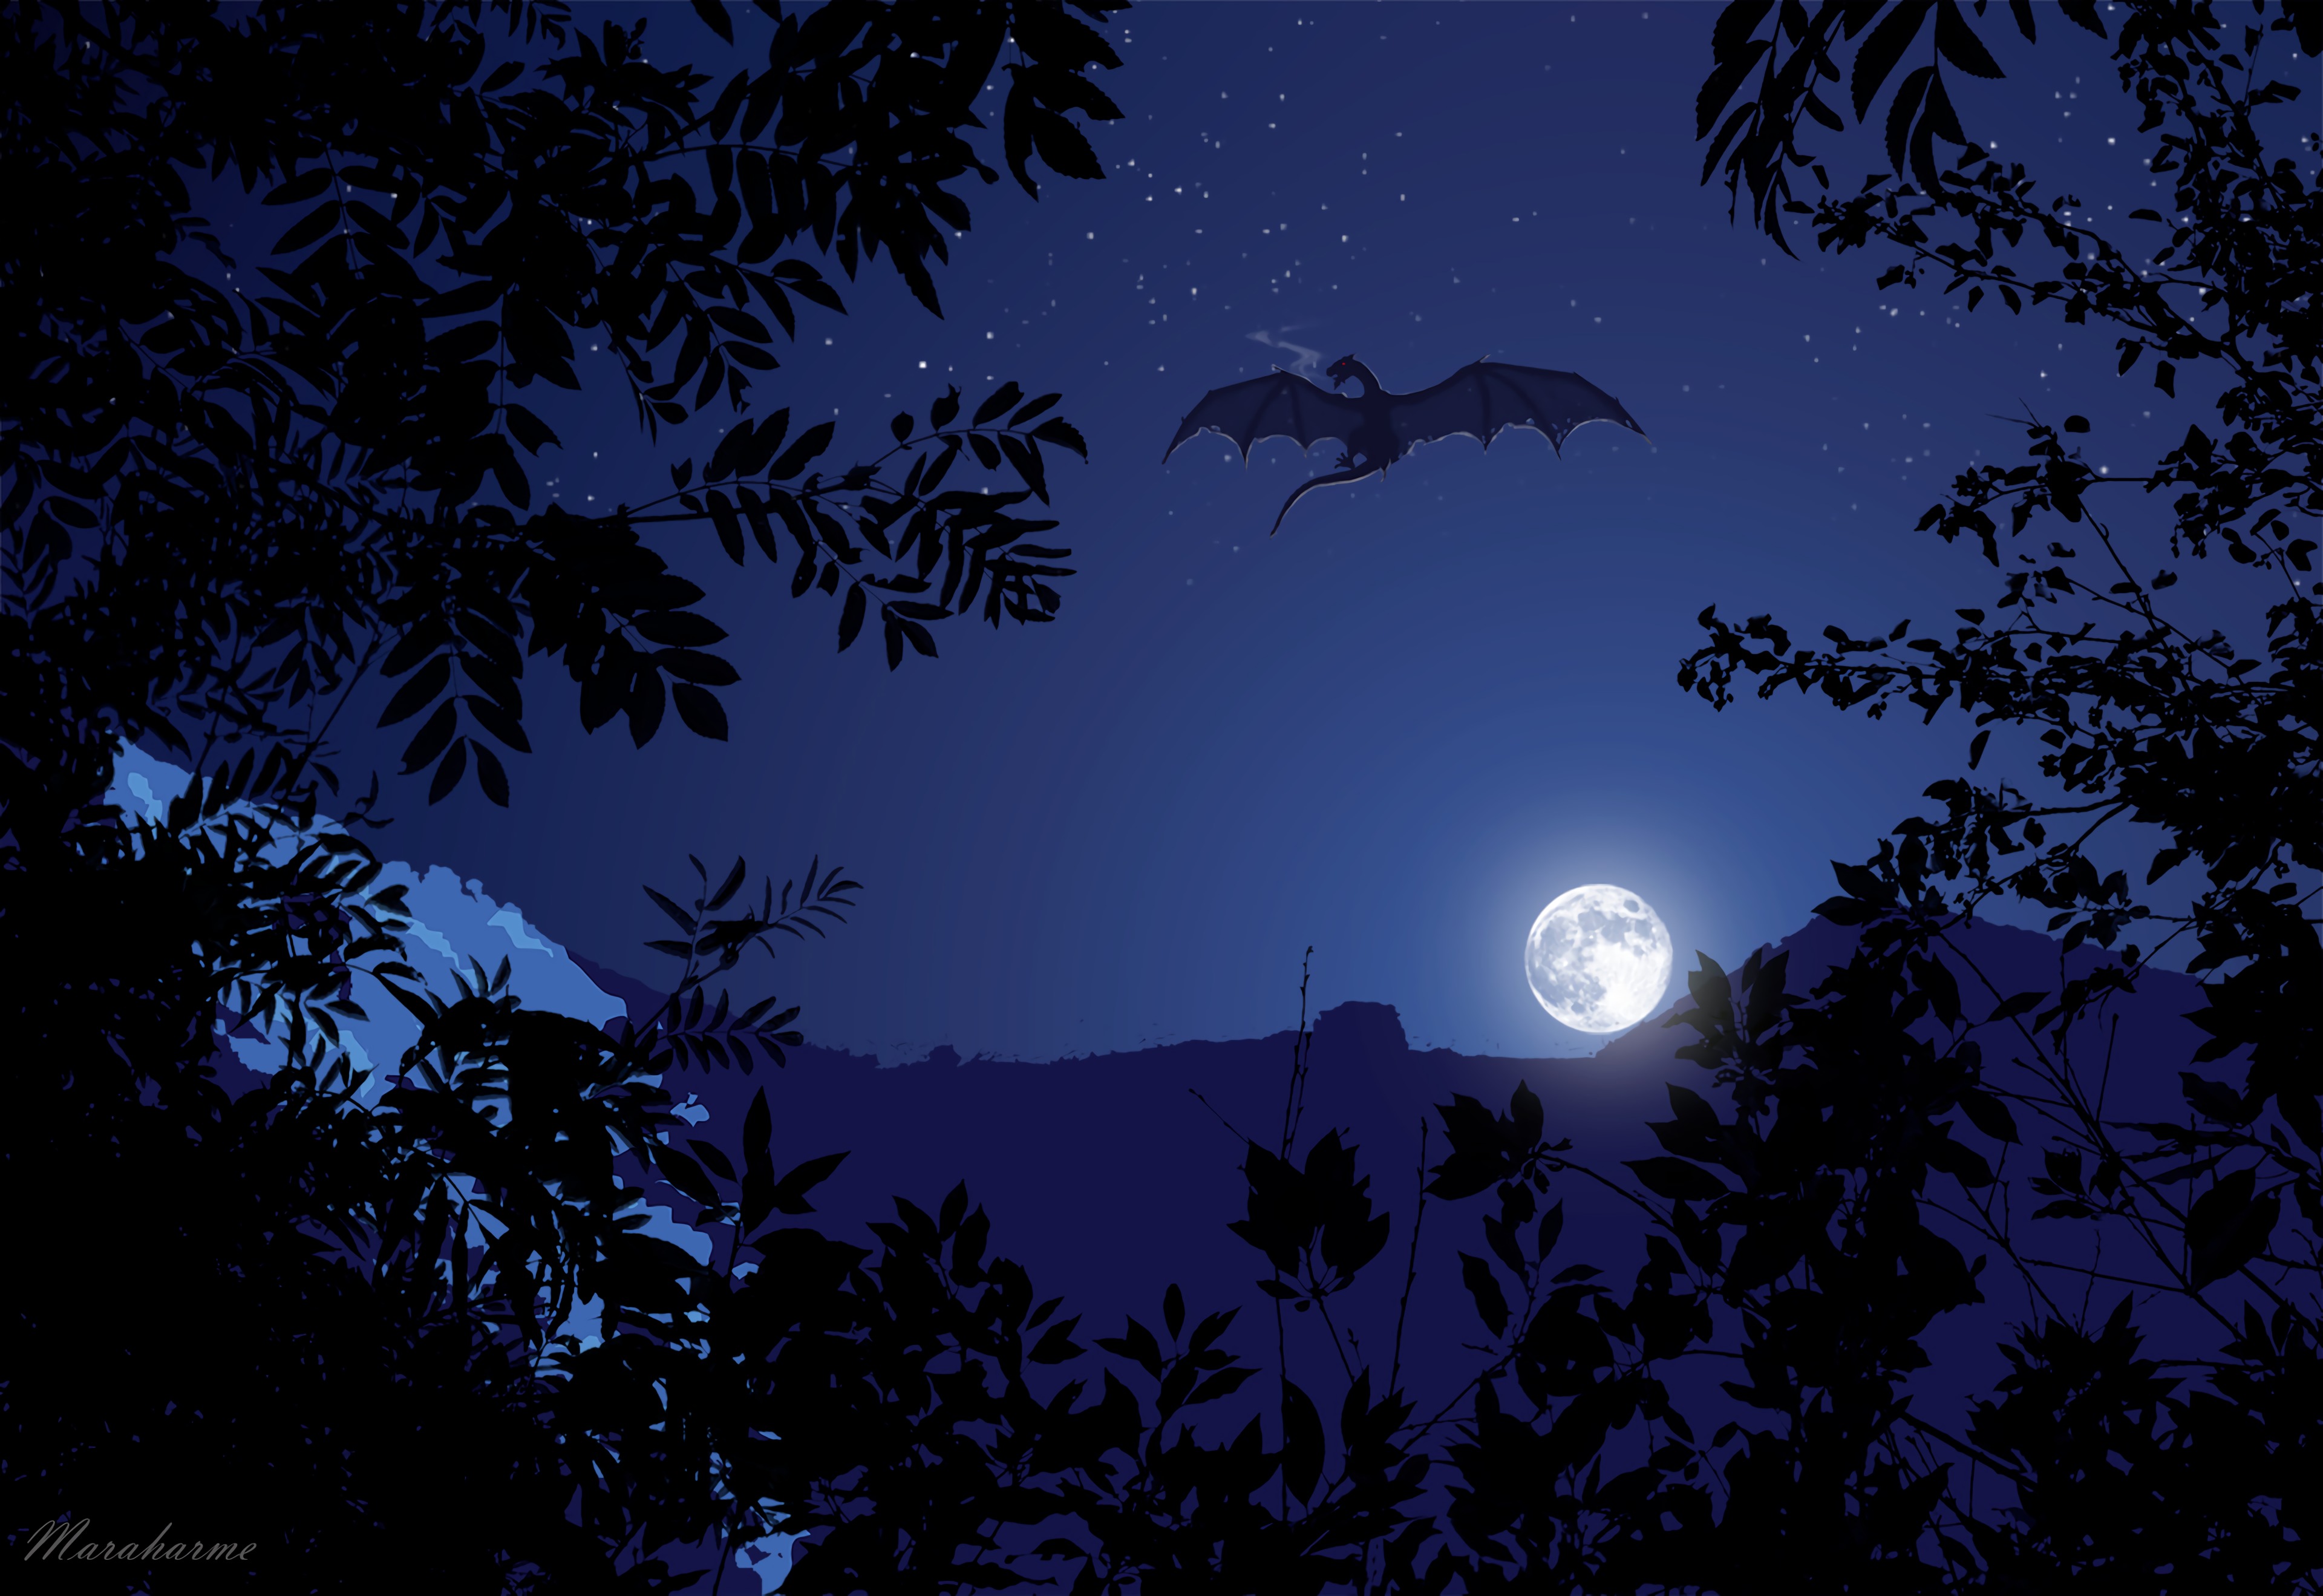 wallpapers dragon, art, night, moon, fiction, that's incredible